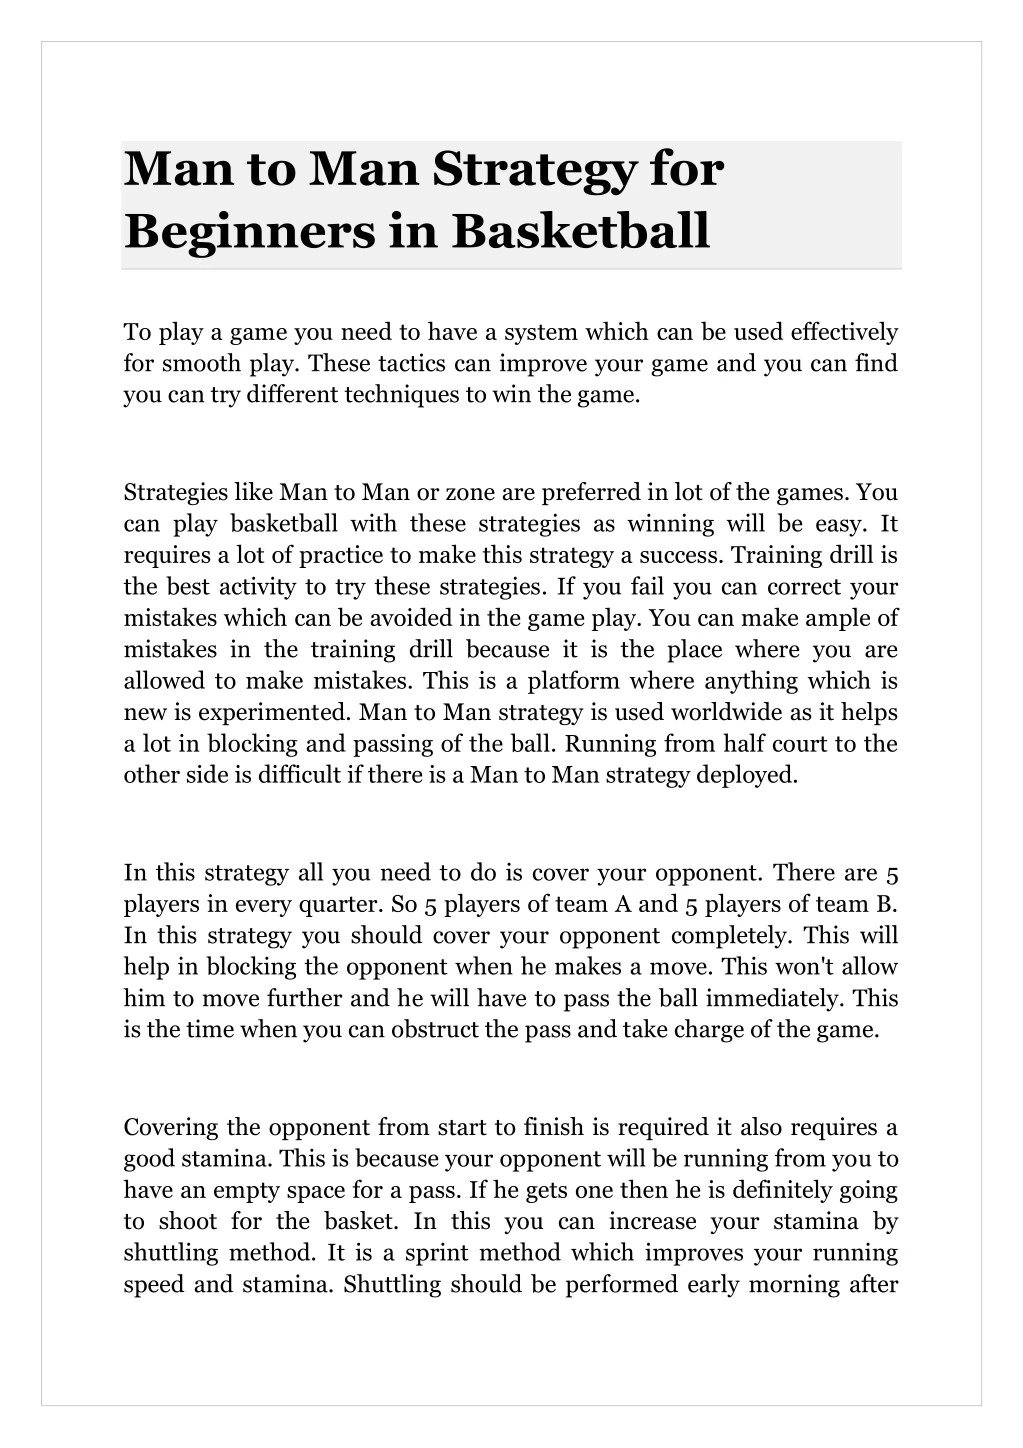 man to man strategy for beginners in basketball